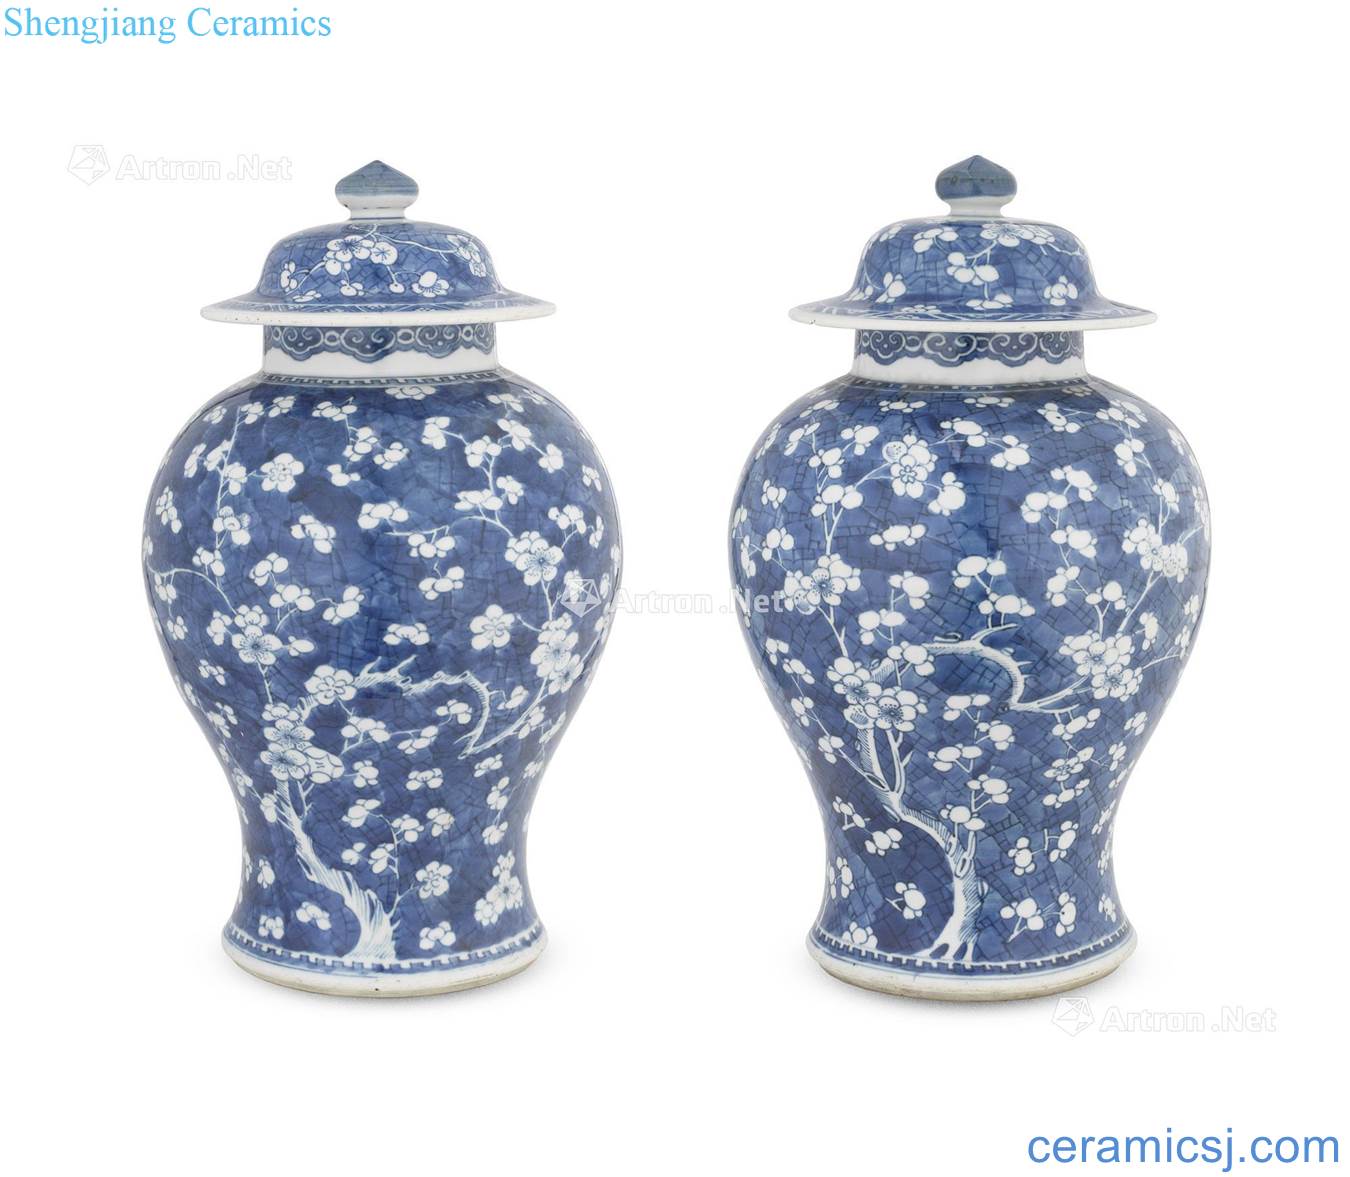 The qing emperor kangxi Ice to crack the plum blossom lines cover canister (a)